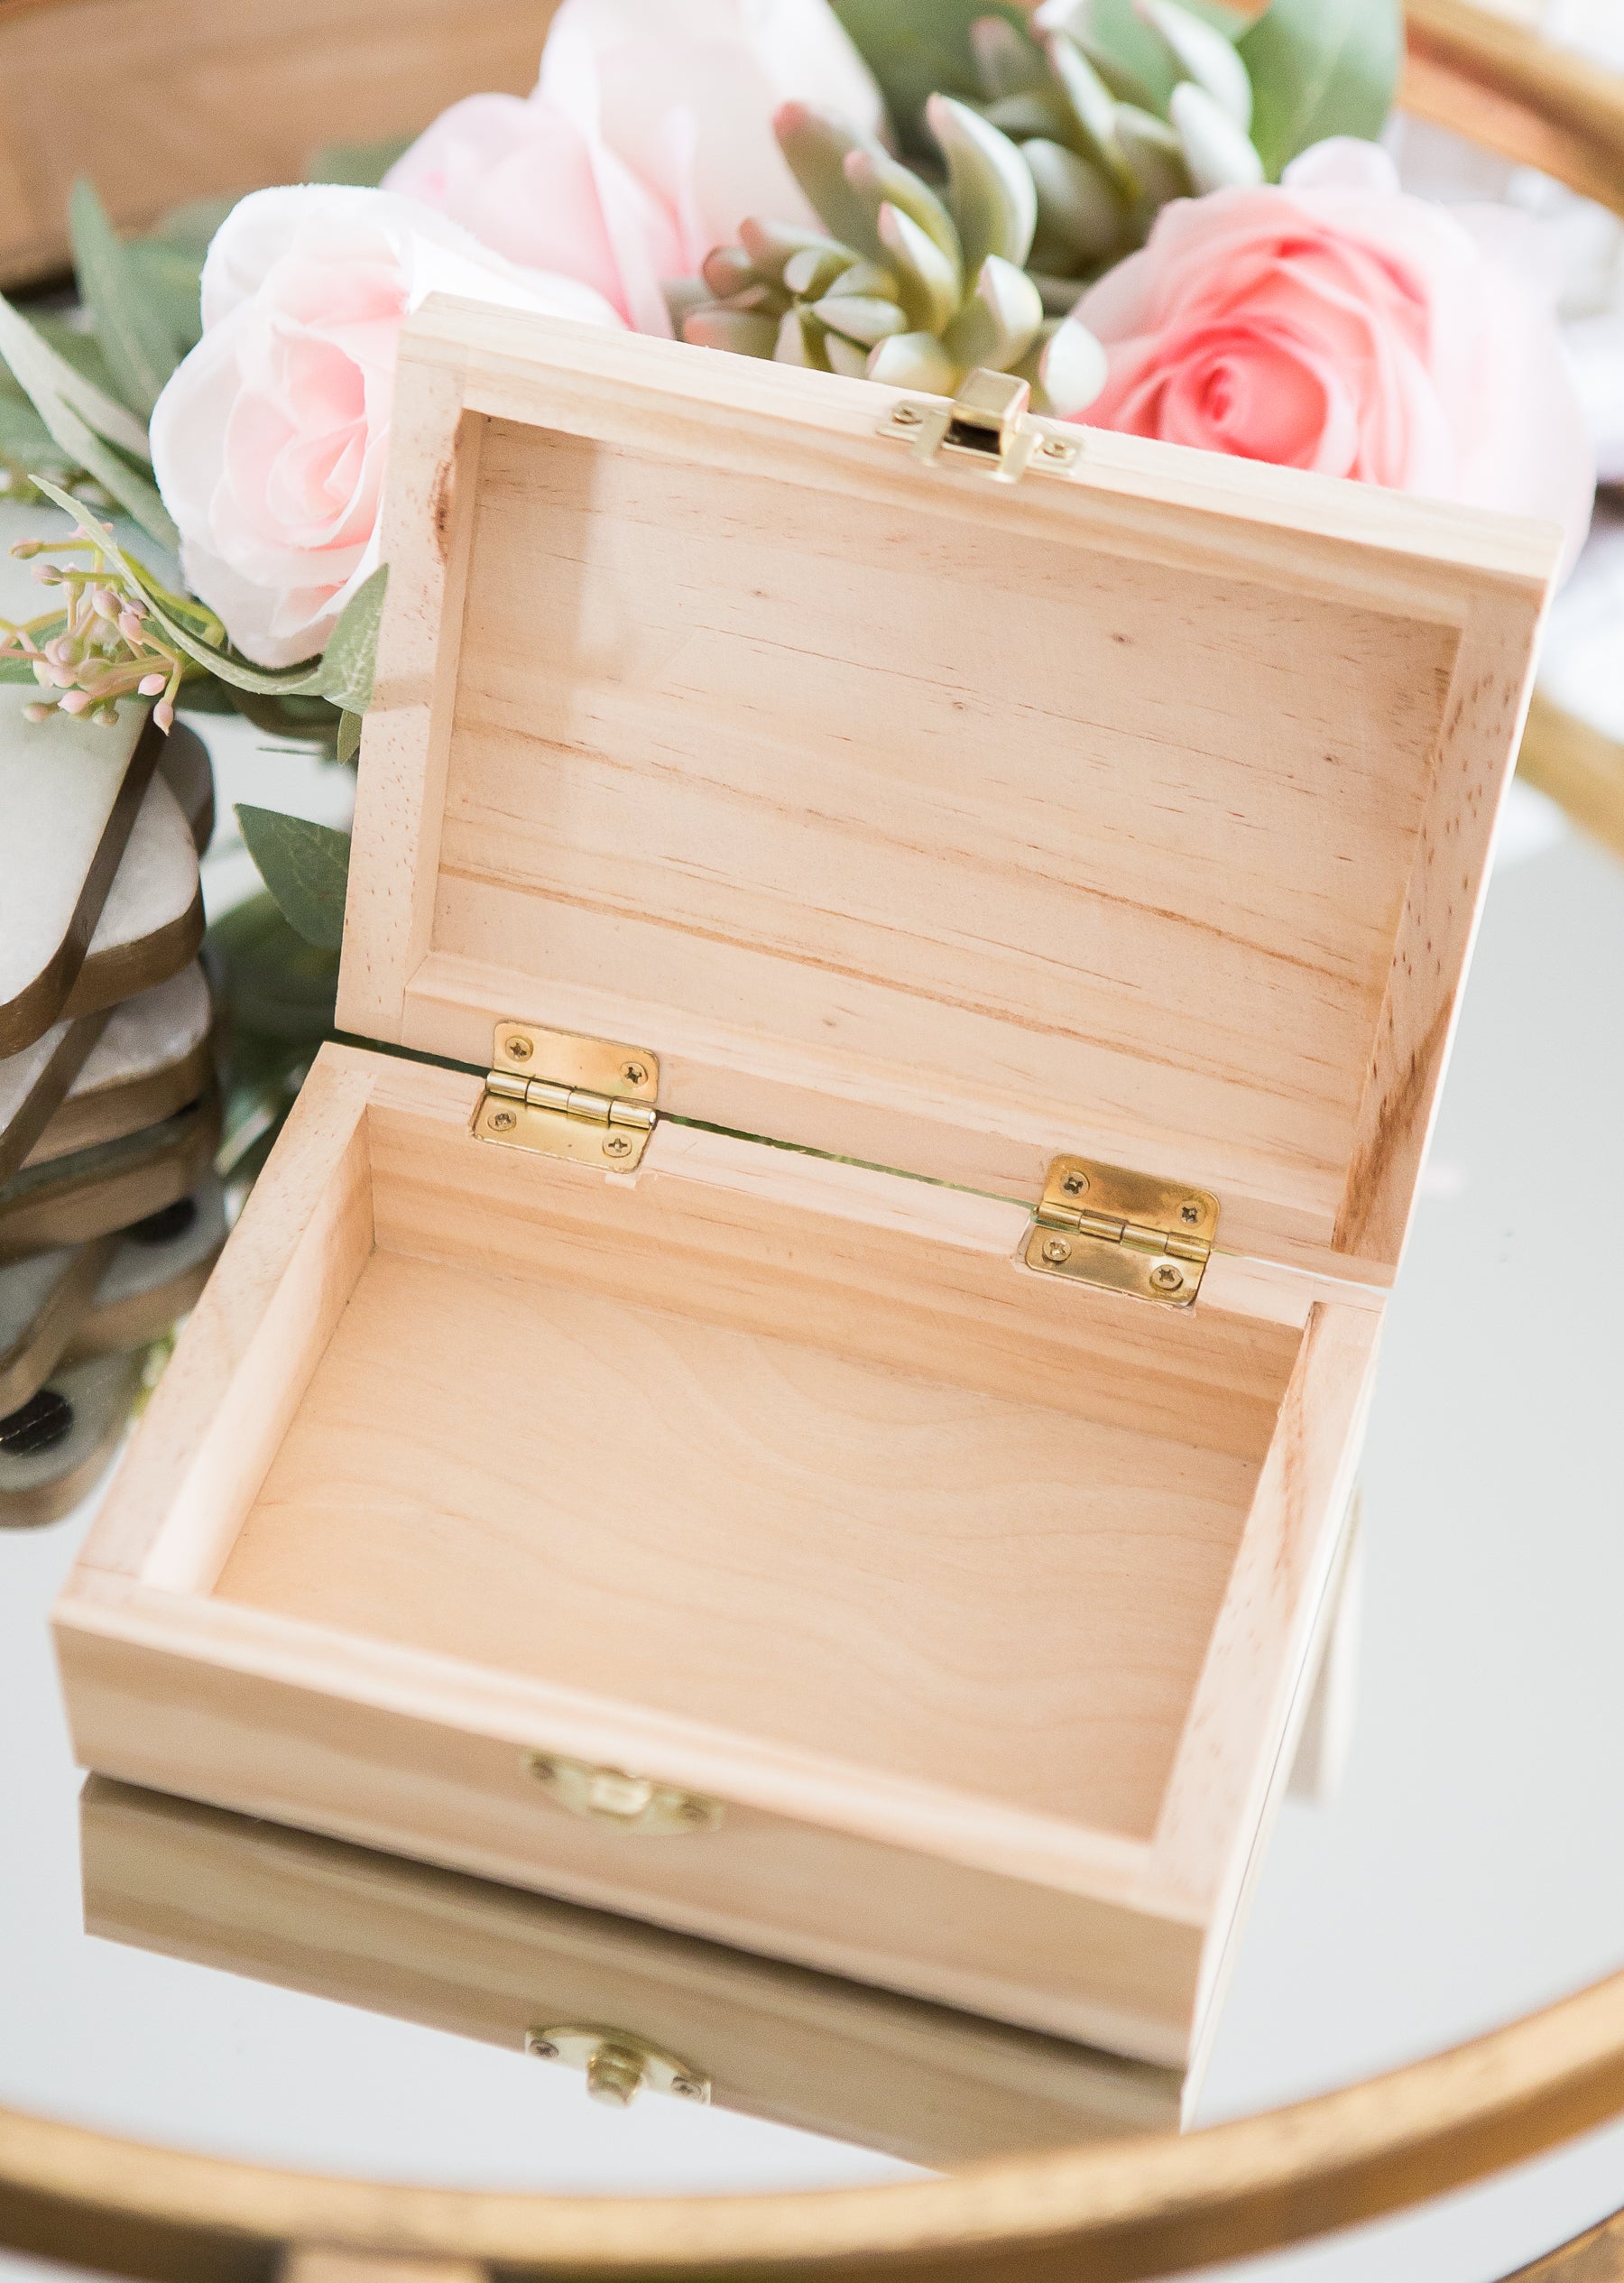 My Name Means Personalized Jewelry Box